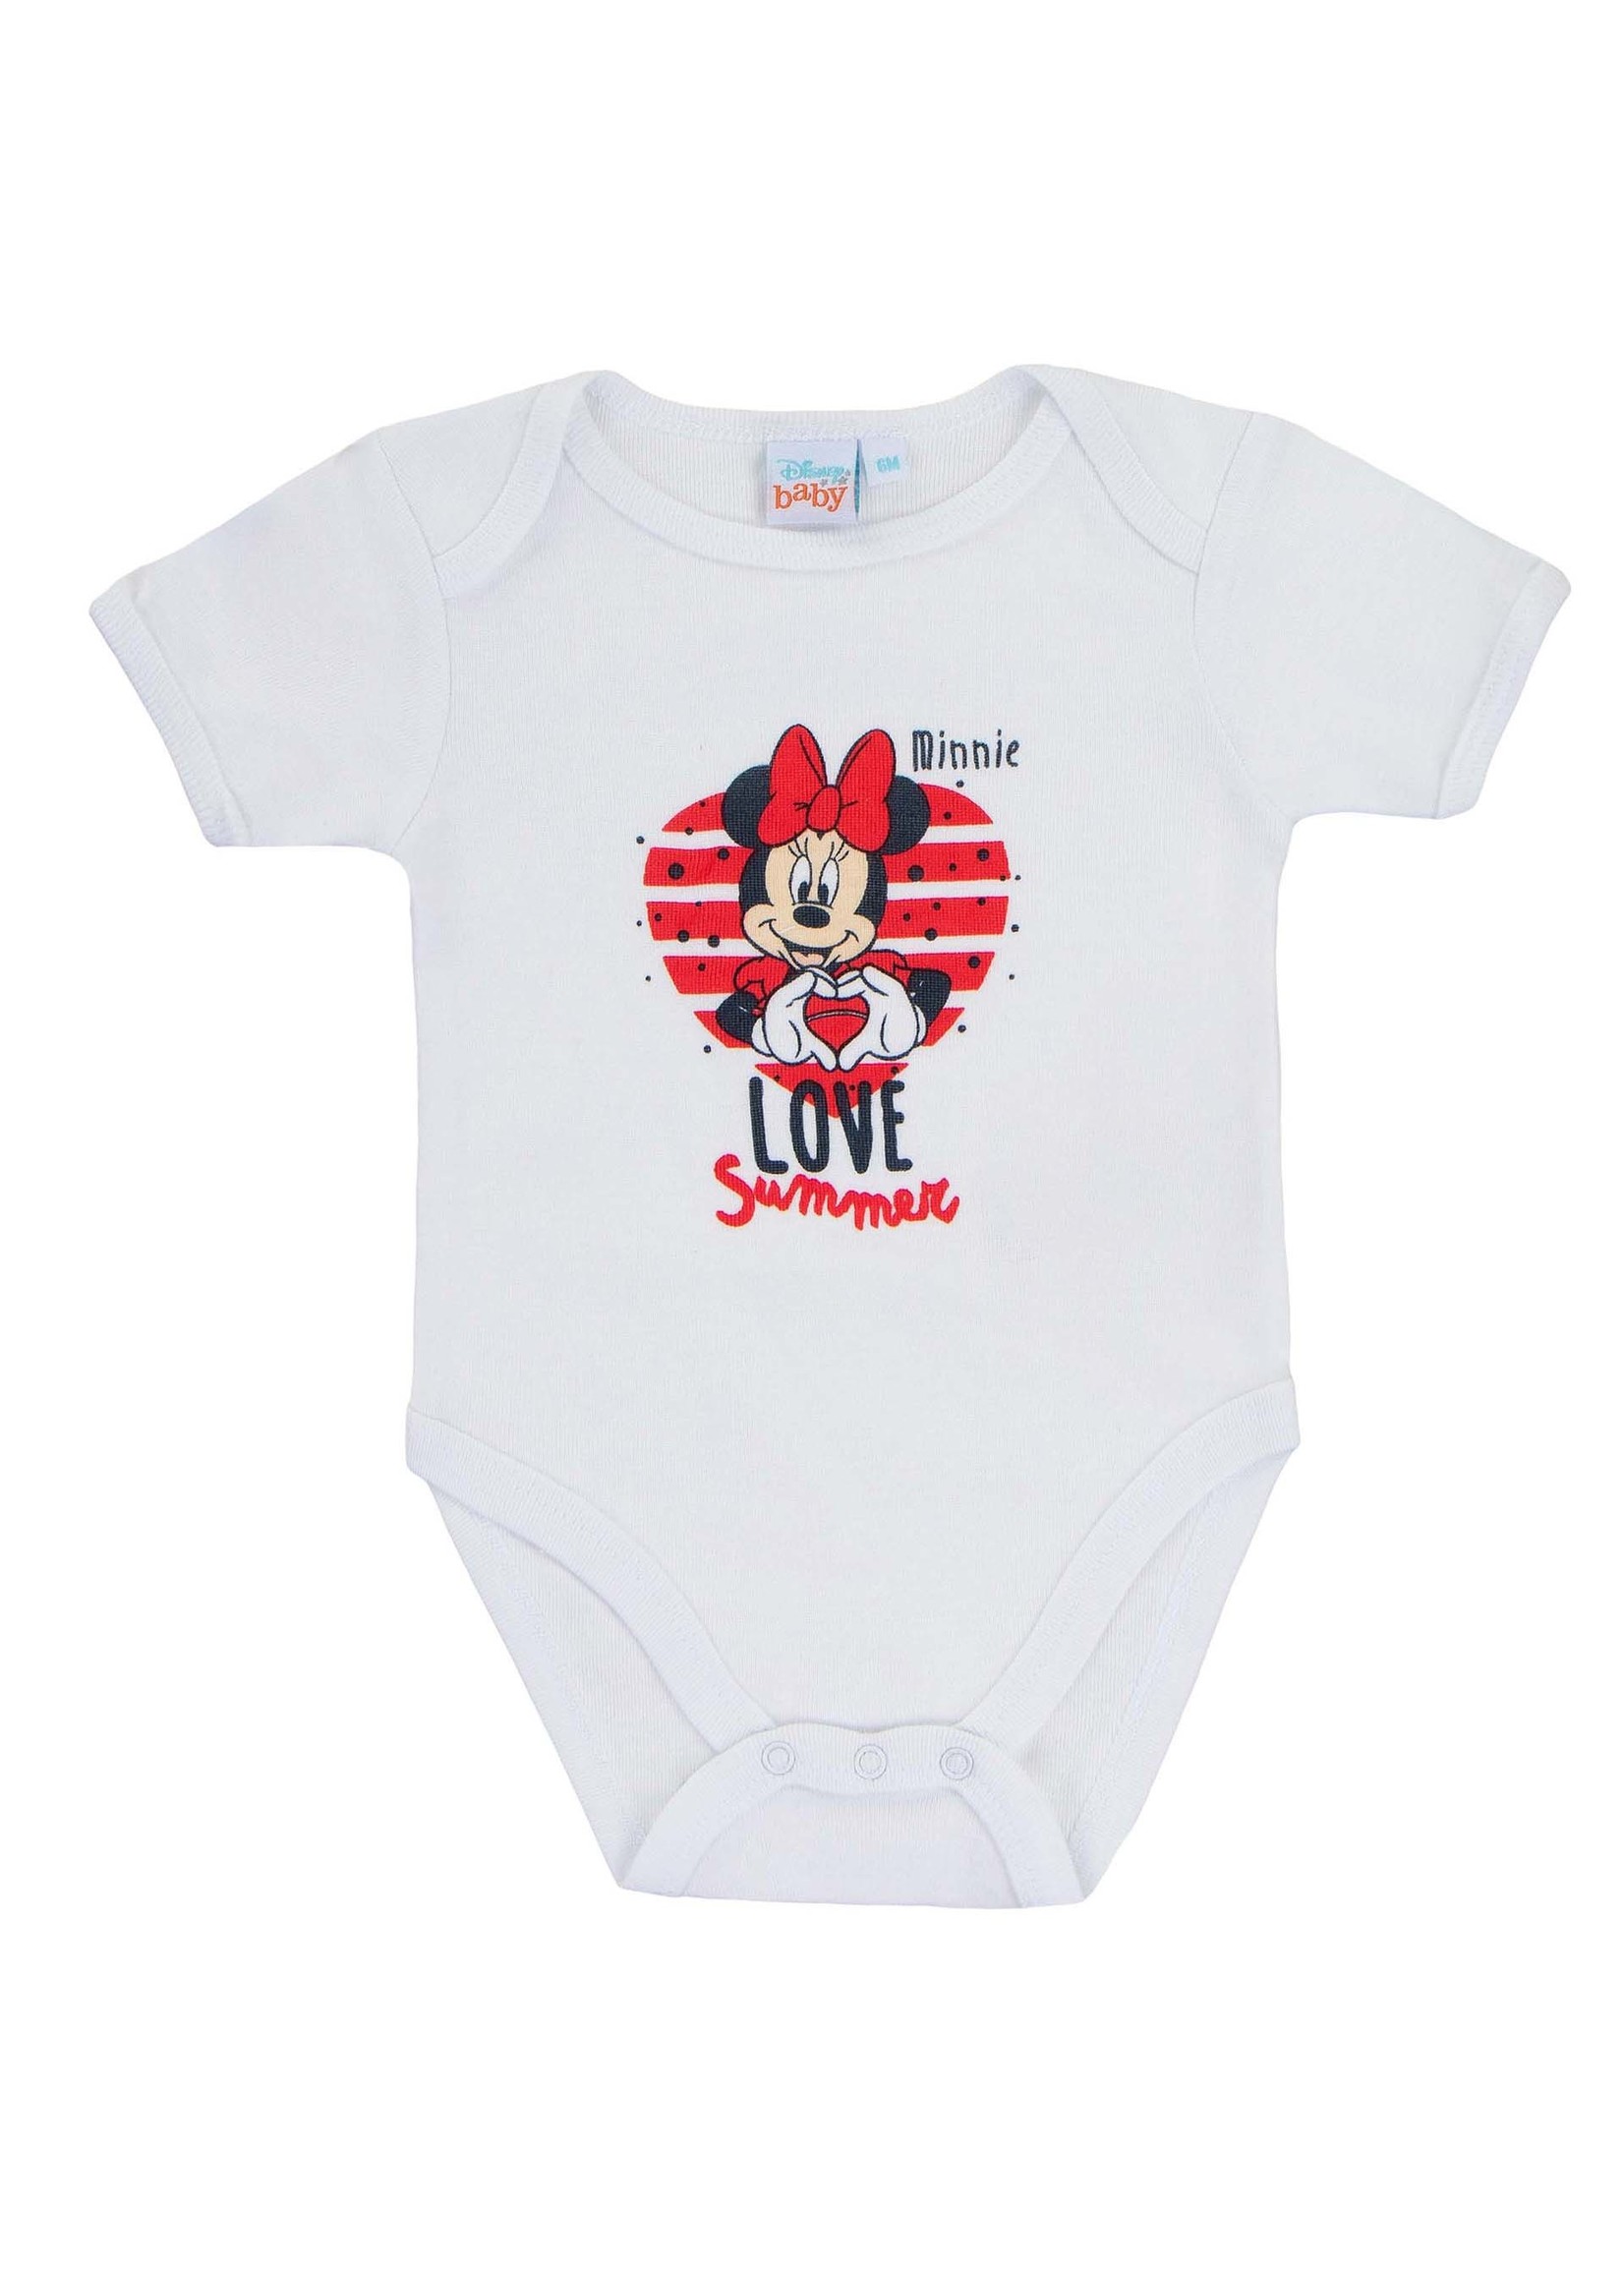 Disney baby Minnie Mouse rompers from Disney baby 2 pack